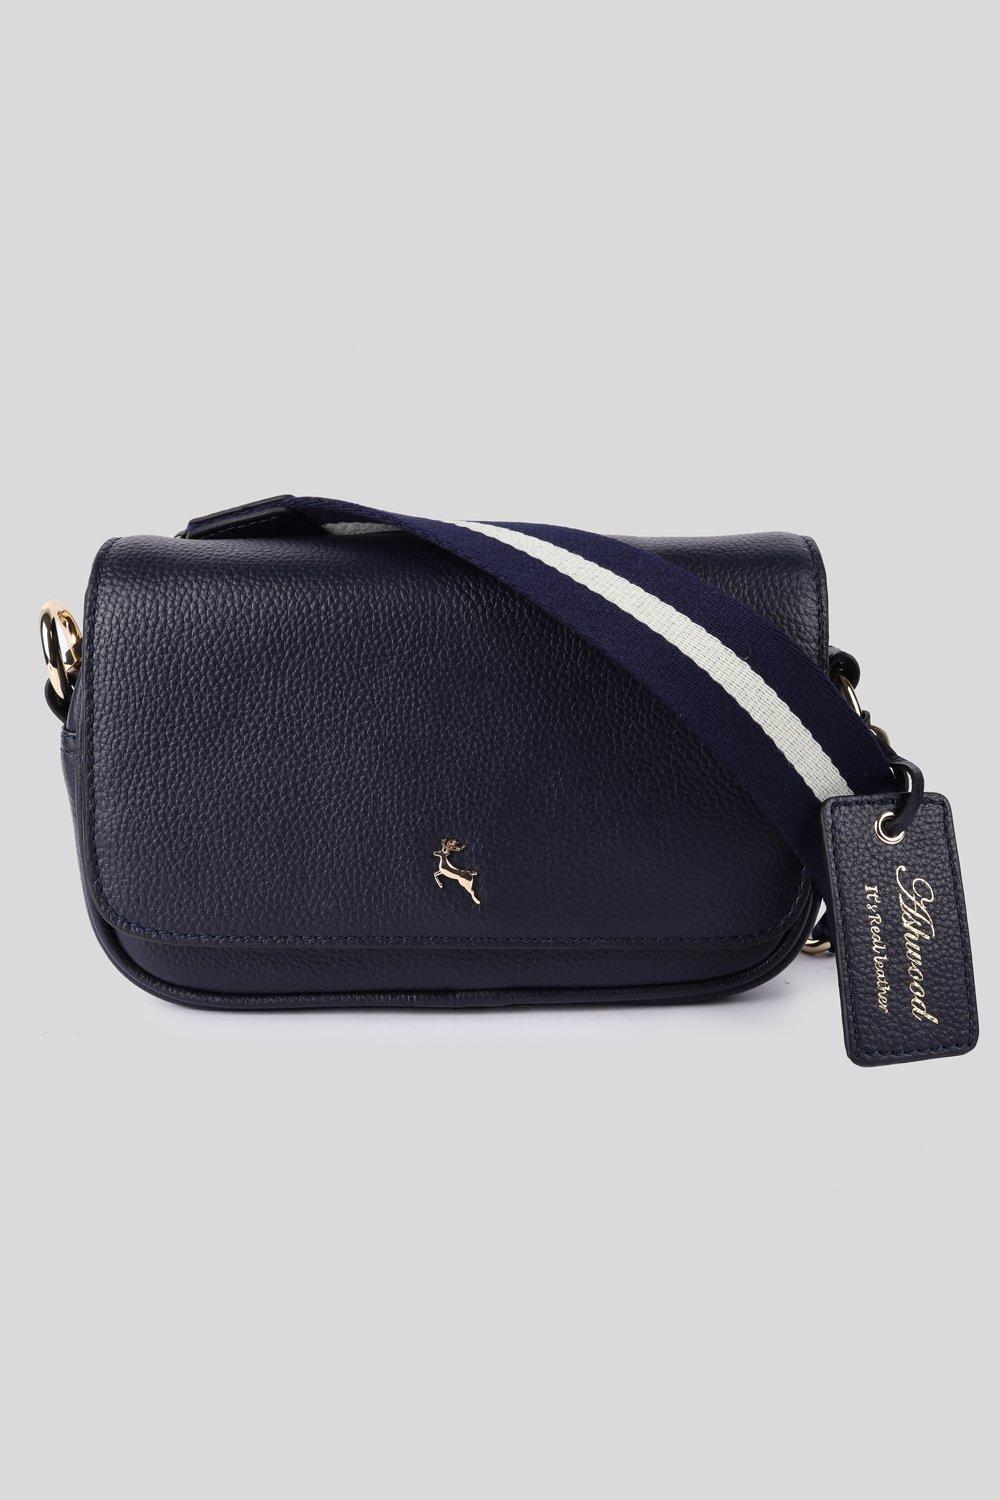 Lacoste Shoulder & Sling Bags sale - discounted price | FASHIOLA.in